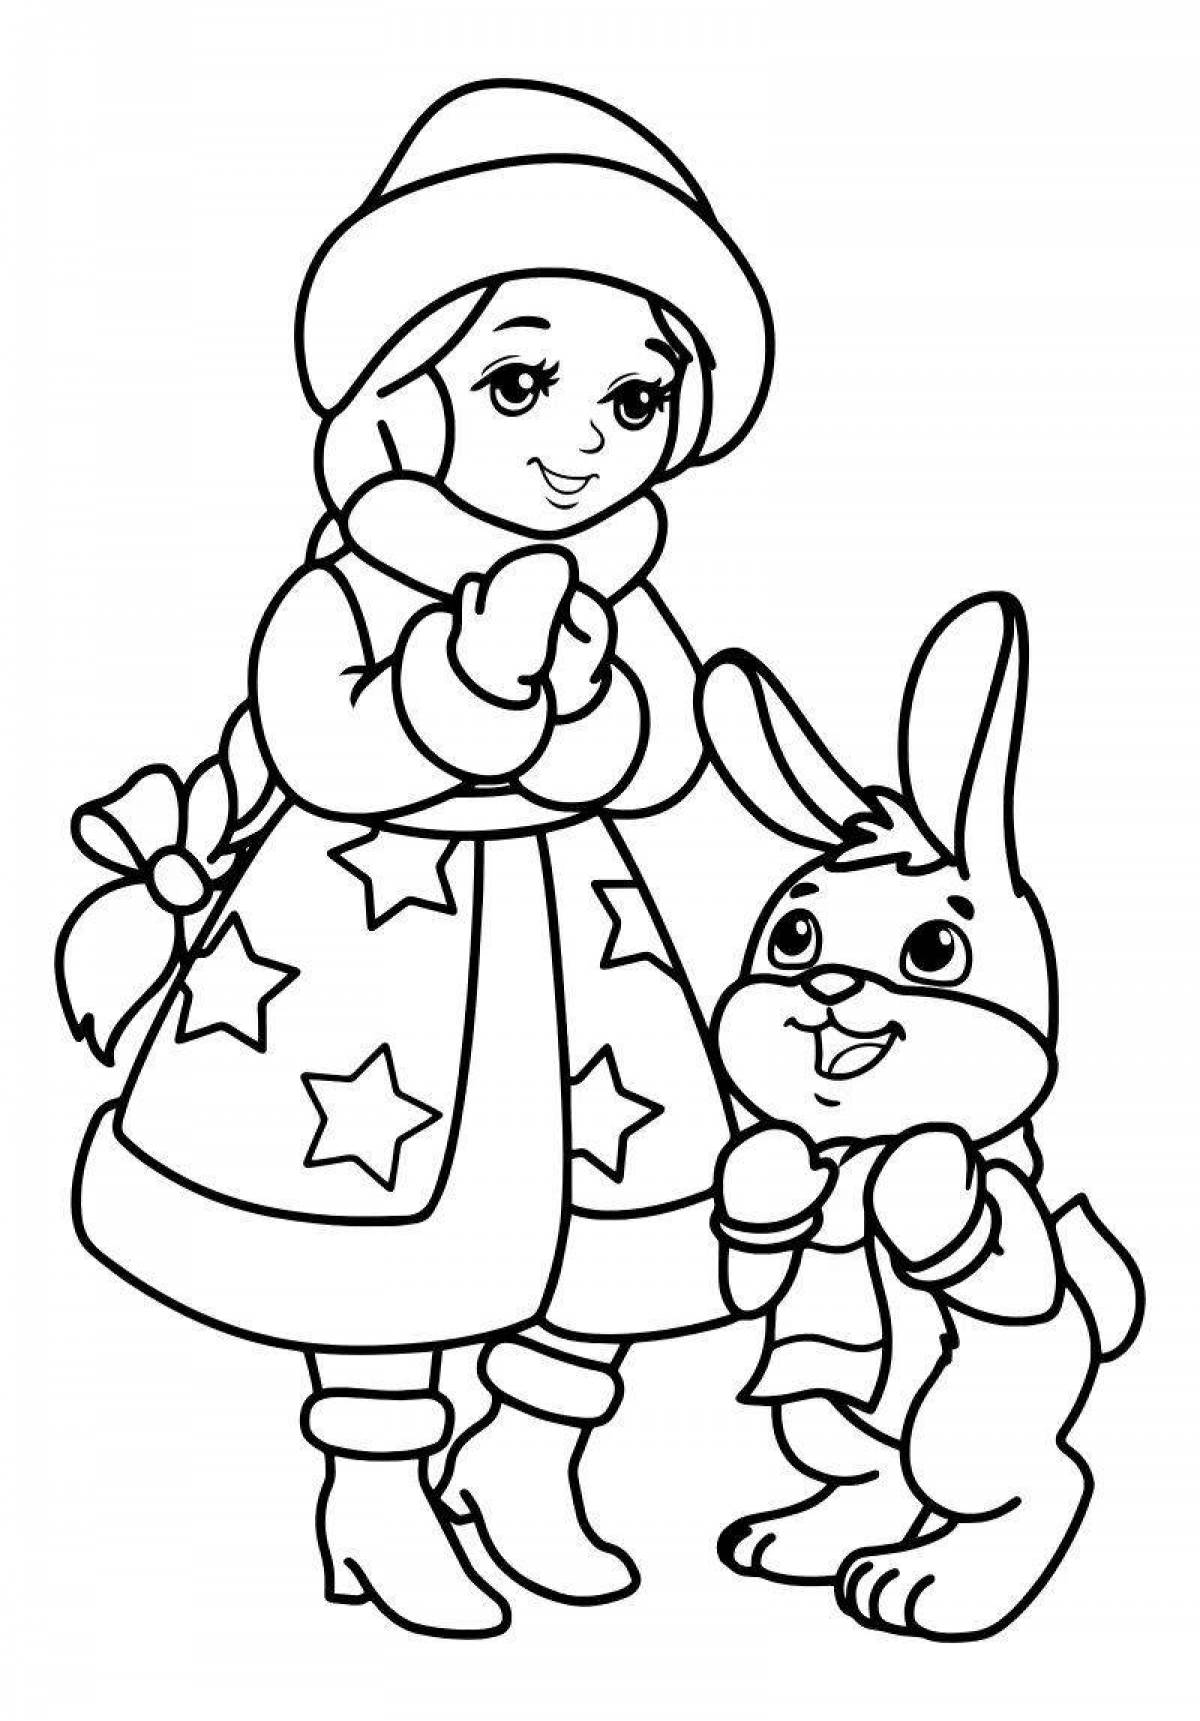 Coloring book magic hare for the new year